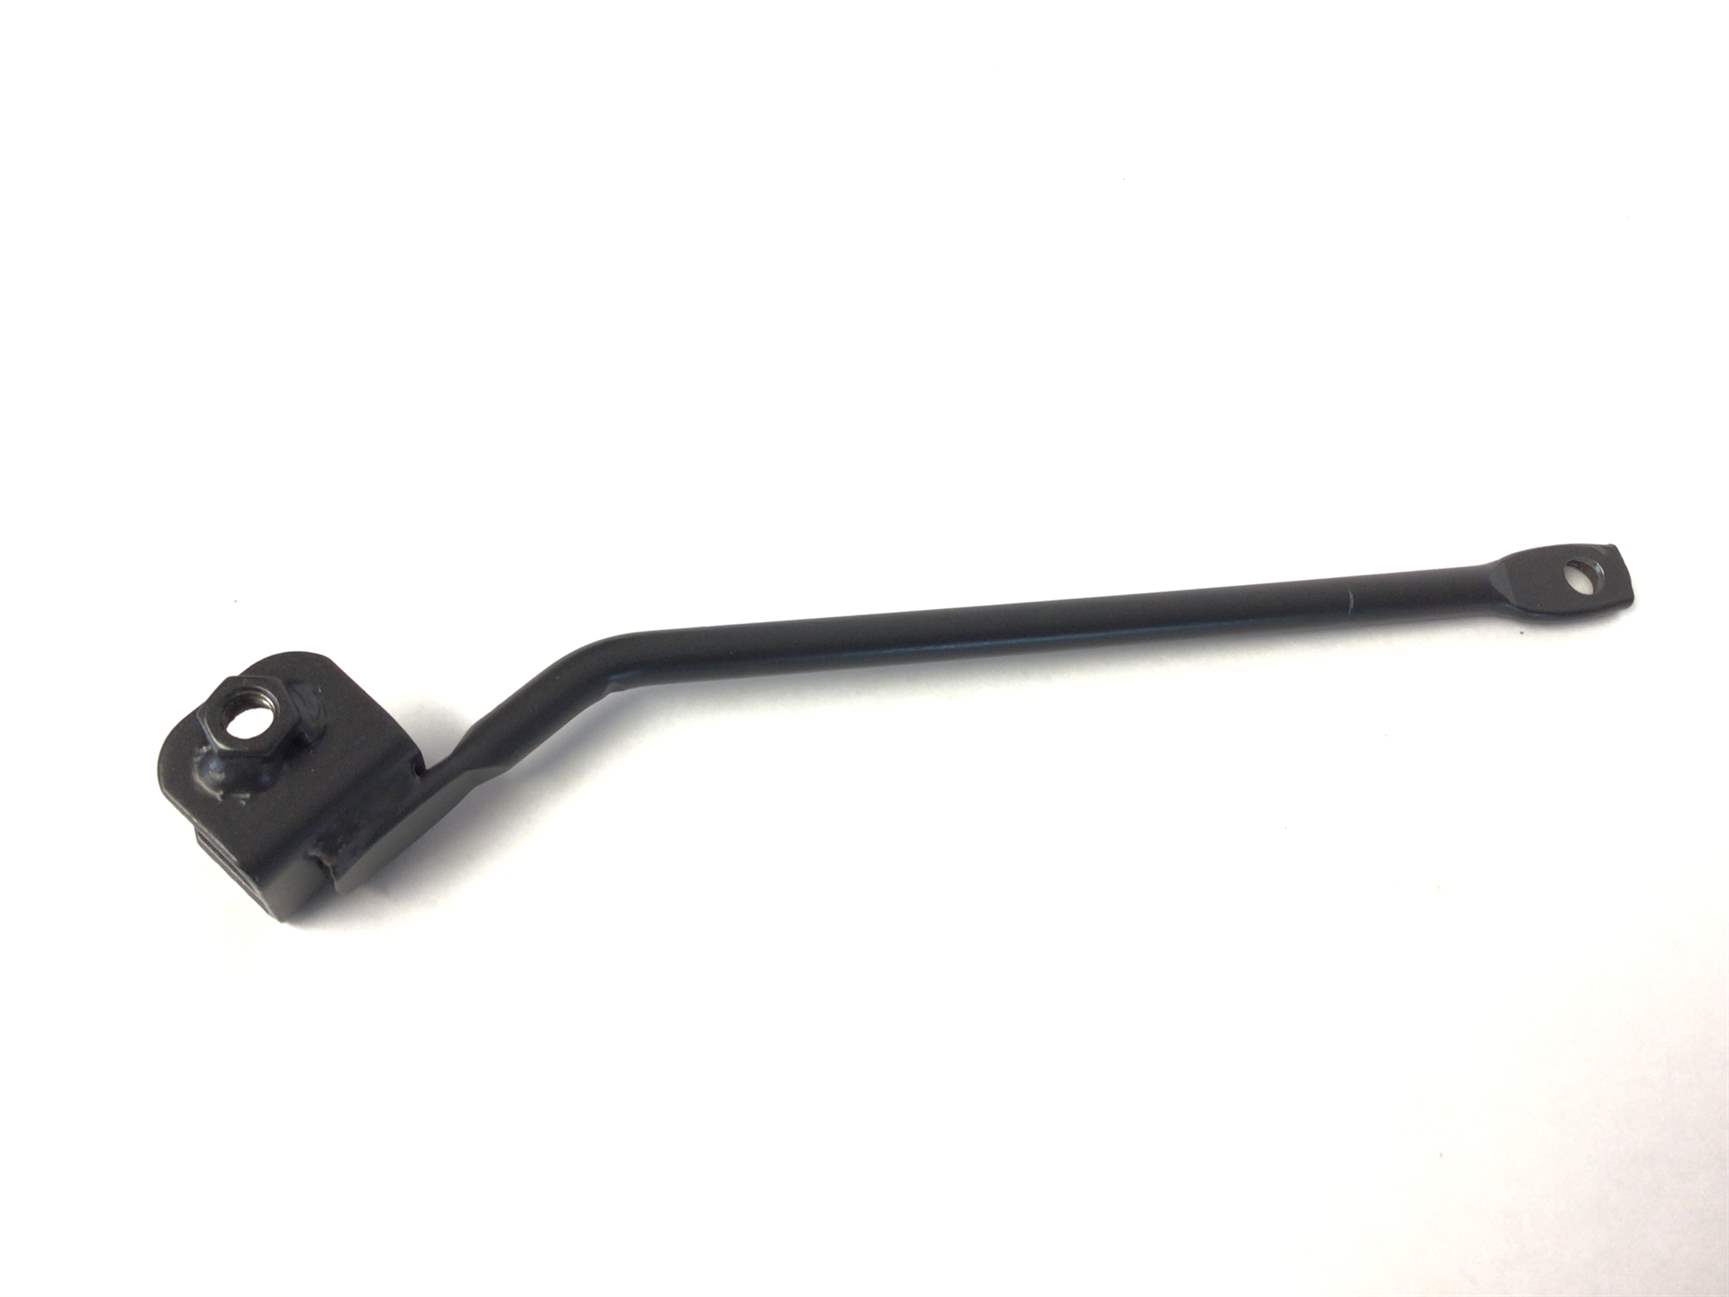 Support Bar (Used)